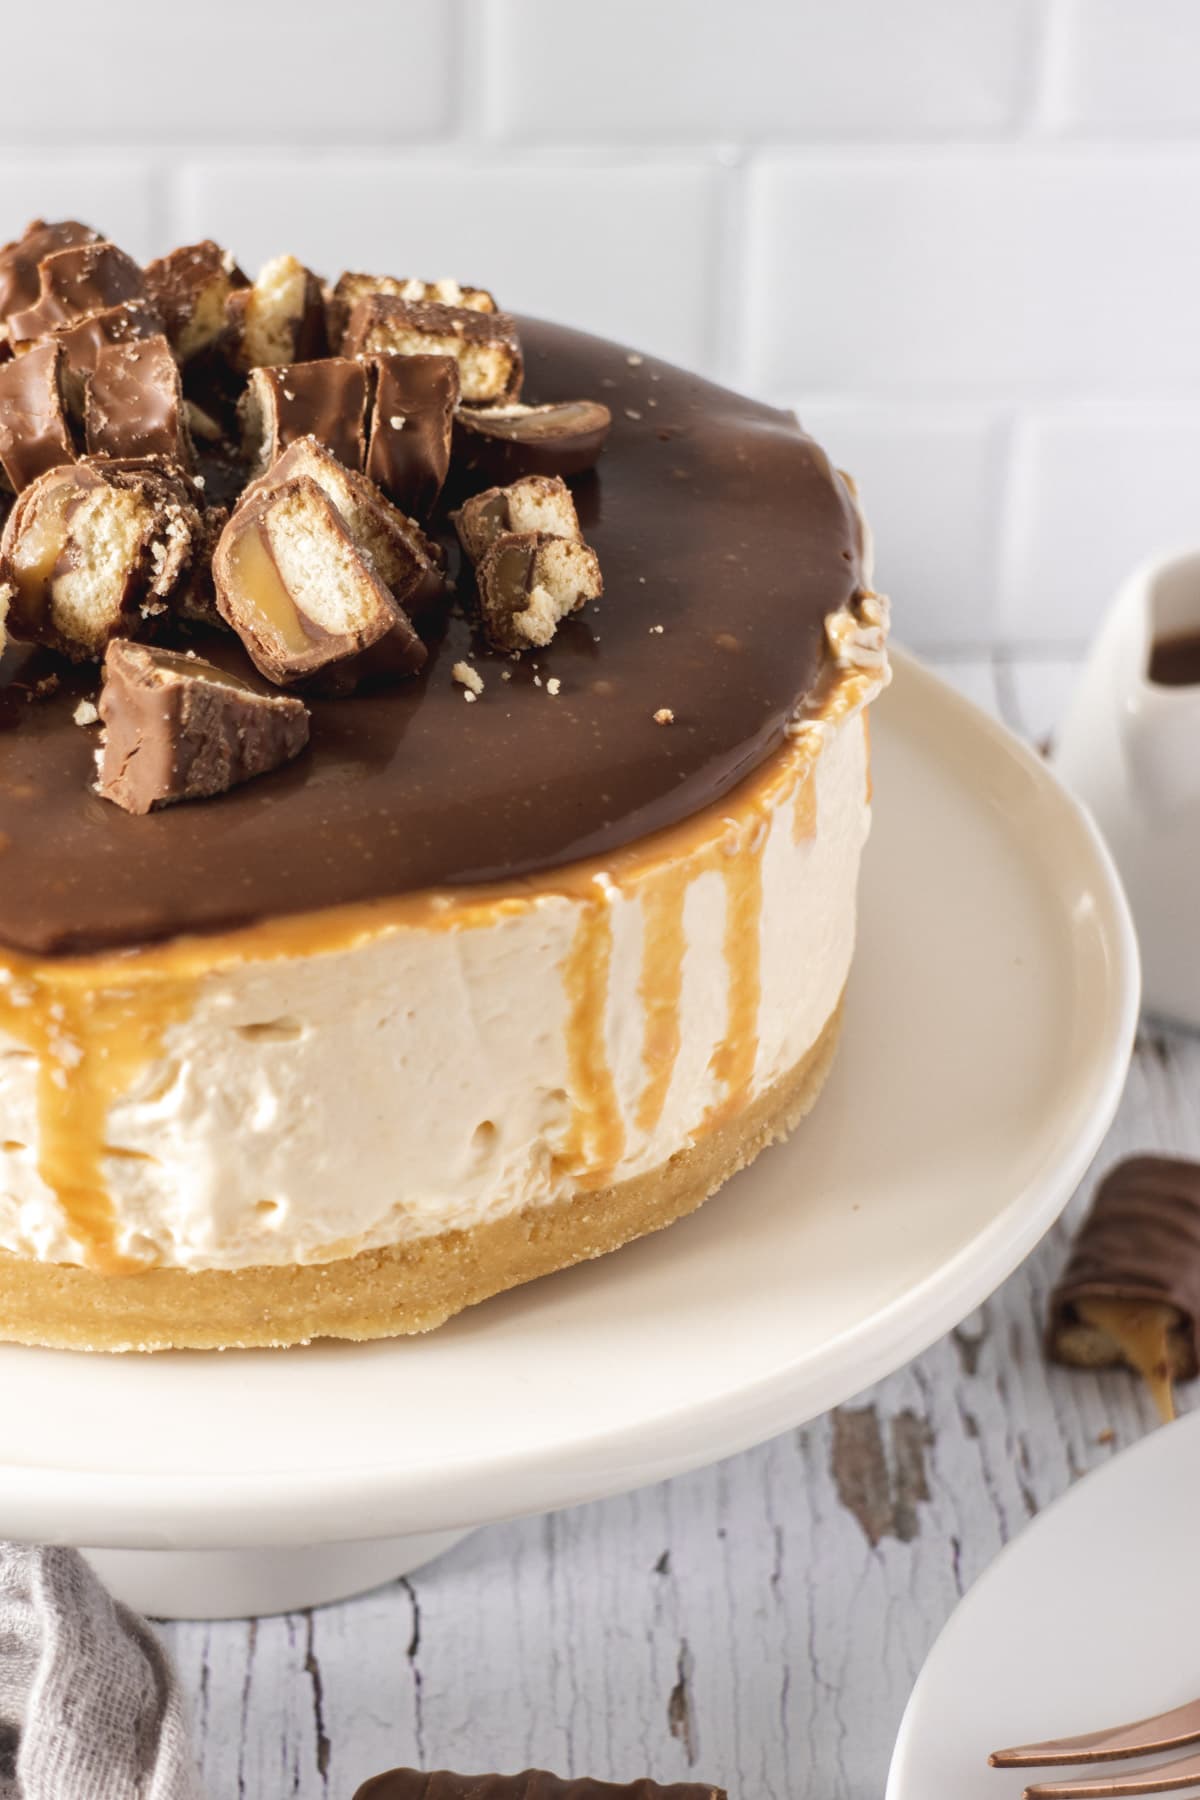 Twix cheesecake with caramel drips down the side